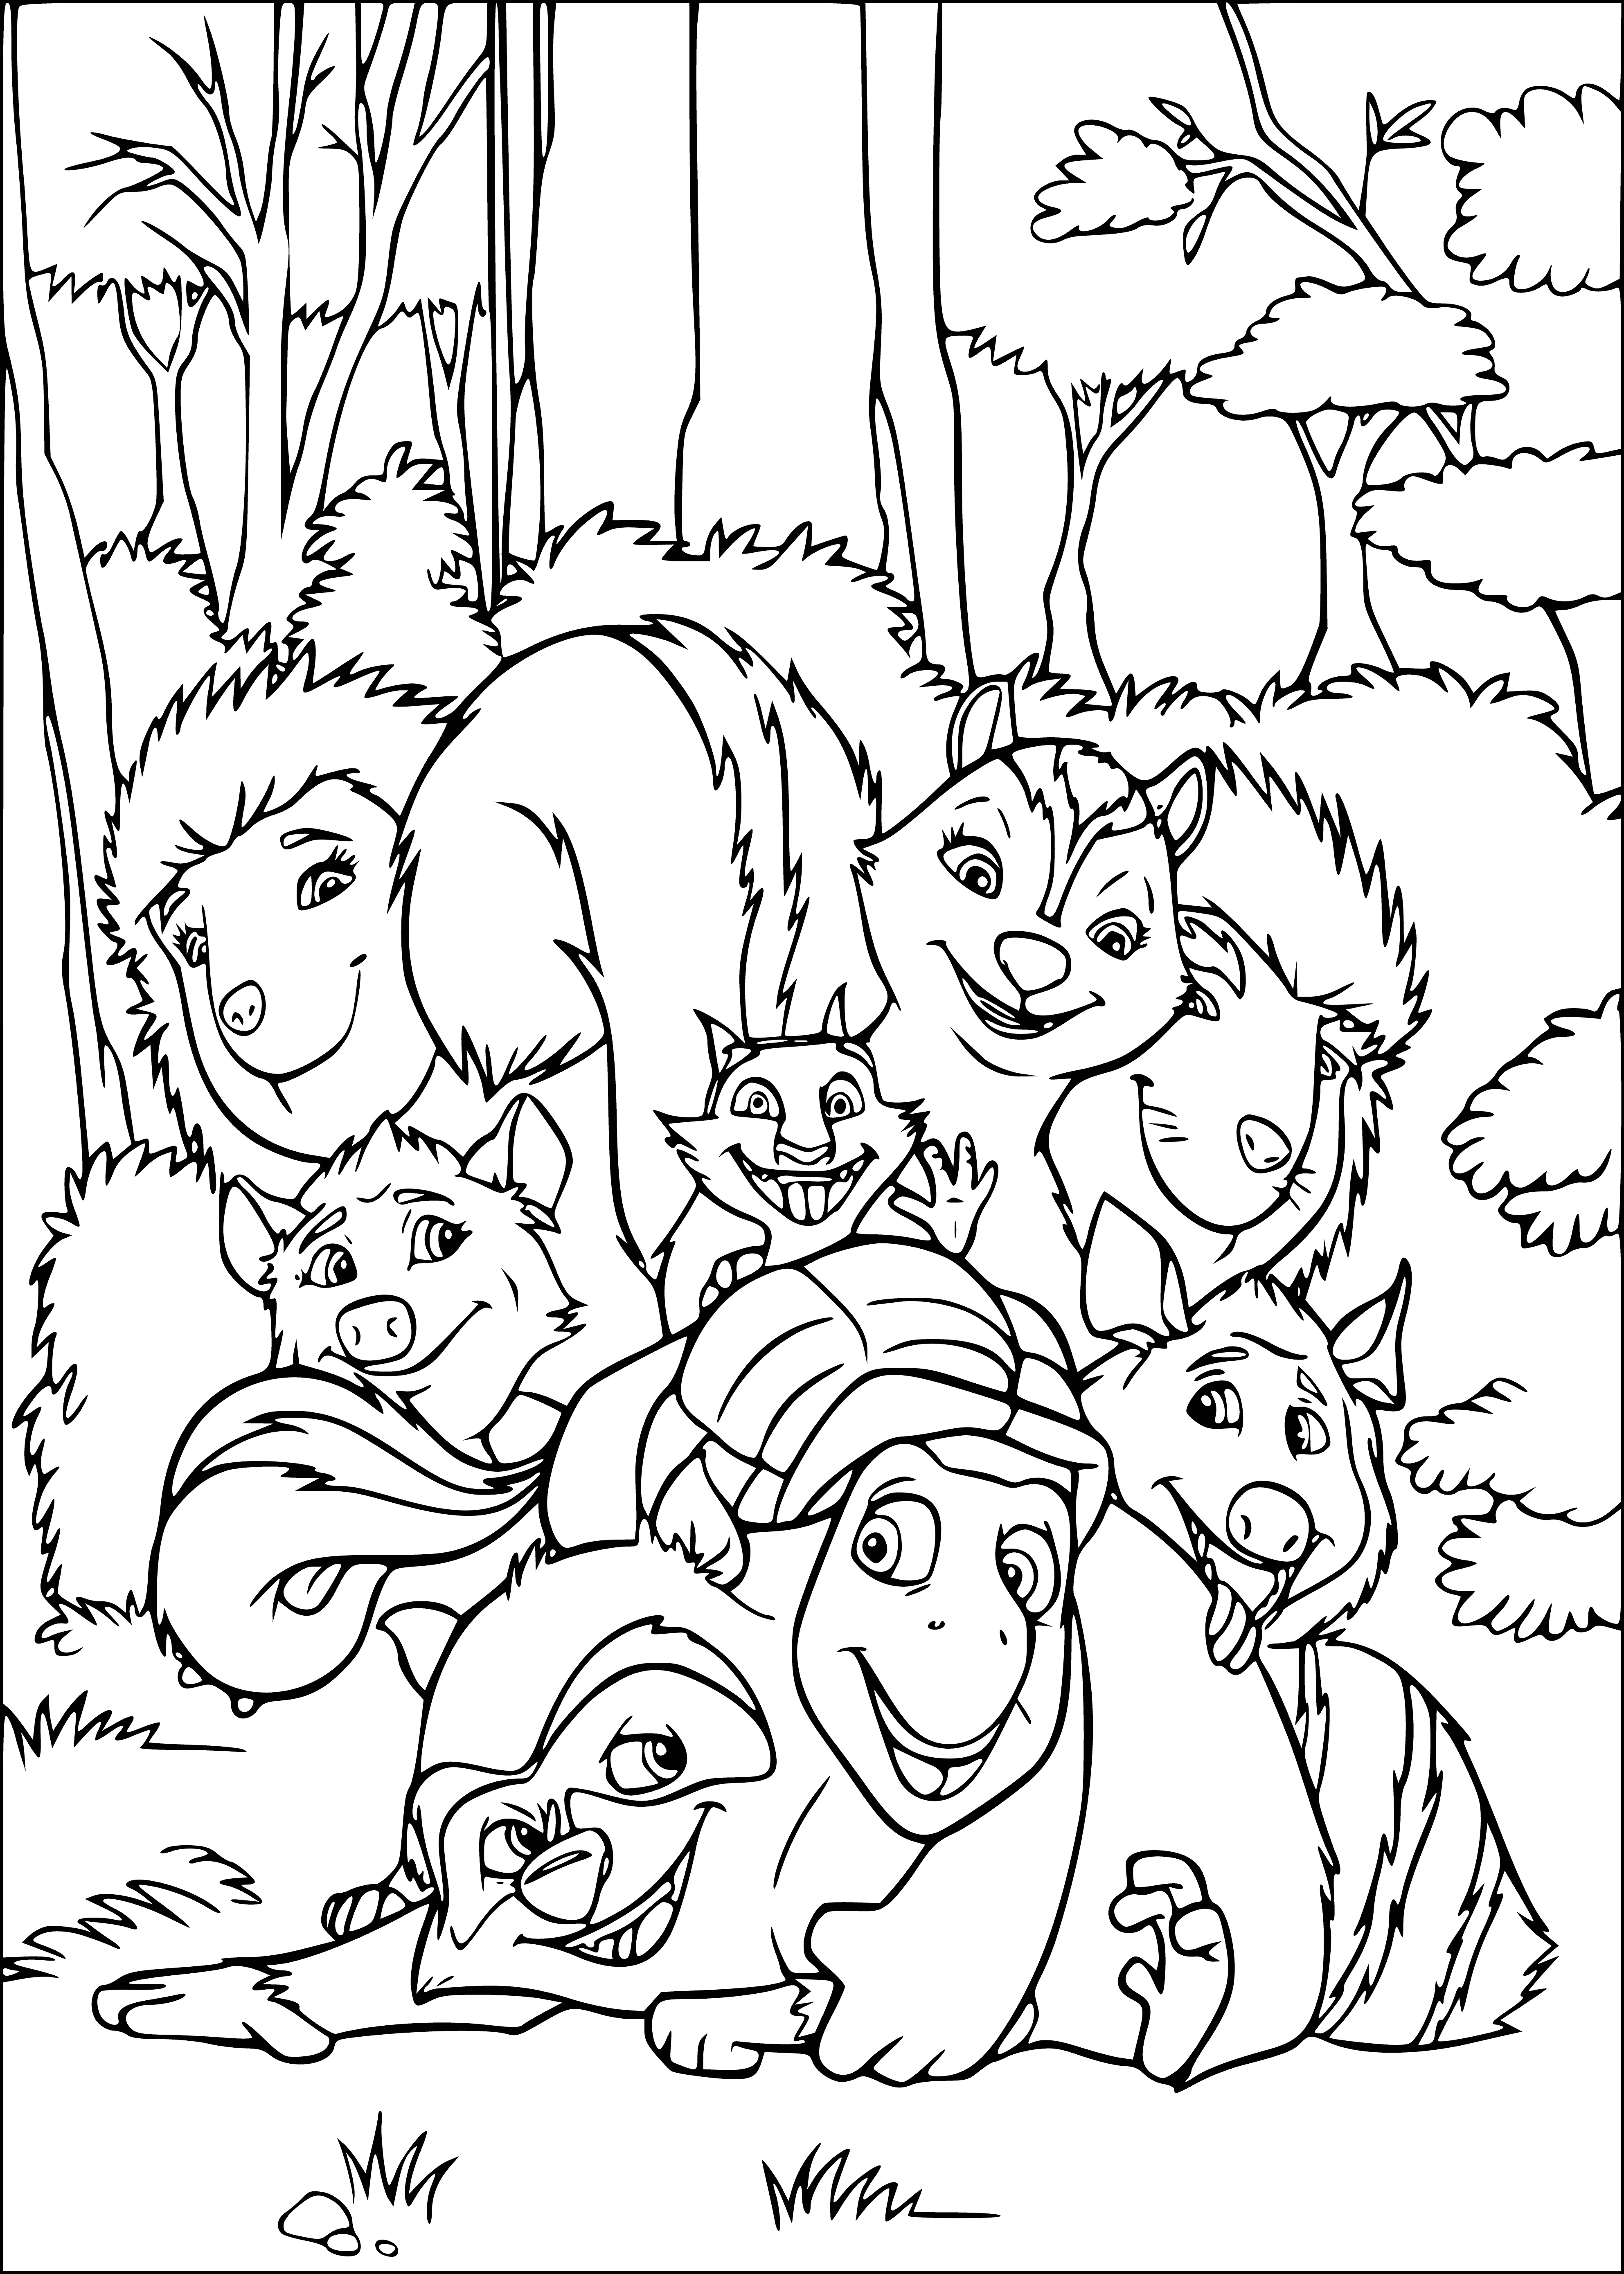 coloring page: Animals gather around picnic table, munching and chatting: squirrel, turtle, skunk, raccoon. In background, tall hedge. #picniclife